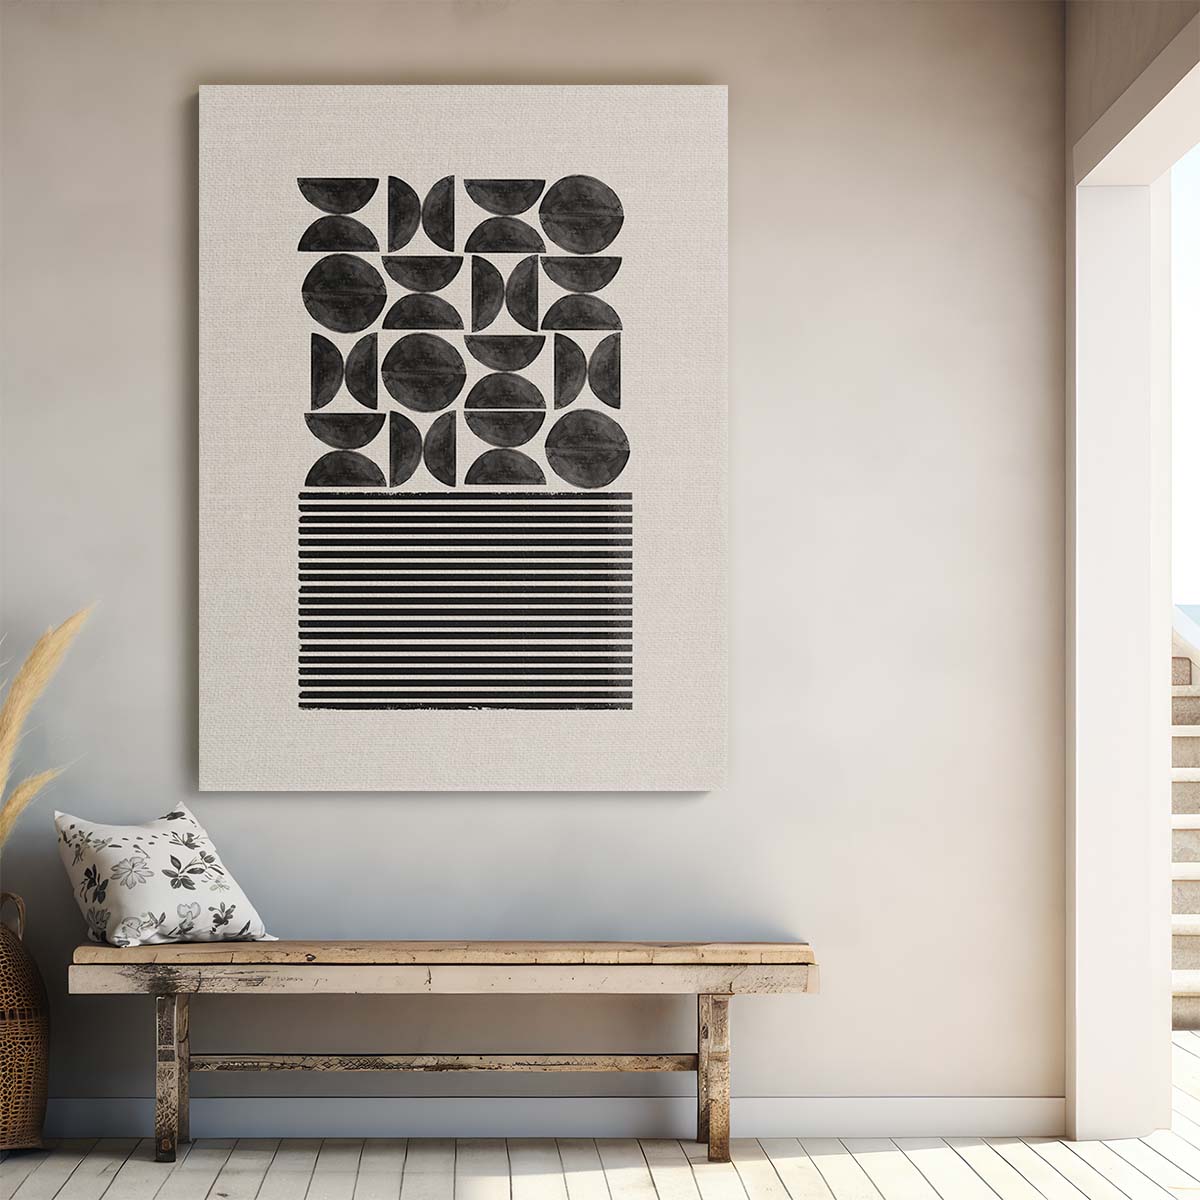 Mid-Century Beige Geometric Illustration Abstract Wall Art by MIUUS STUDIO by Luxuriance Designs, made in USA